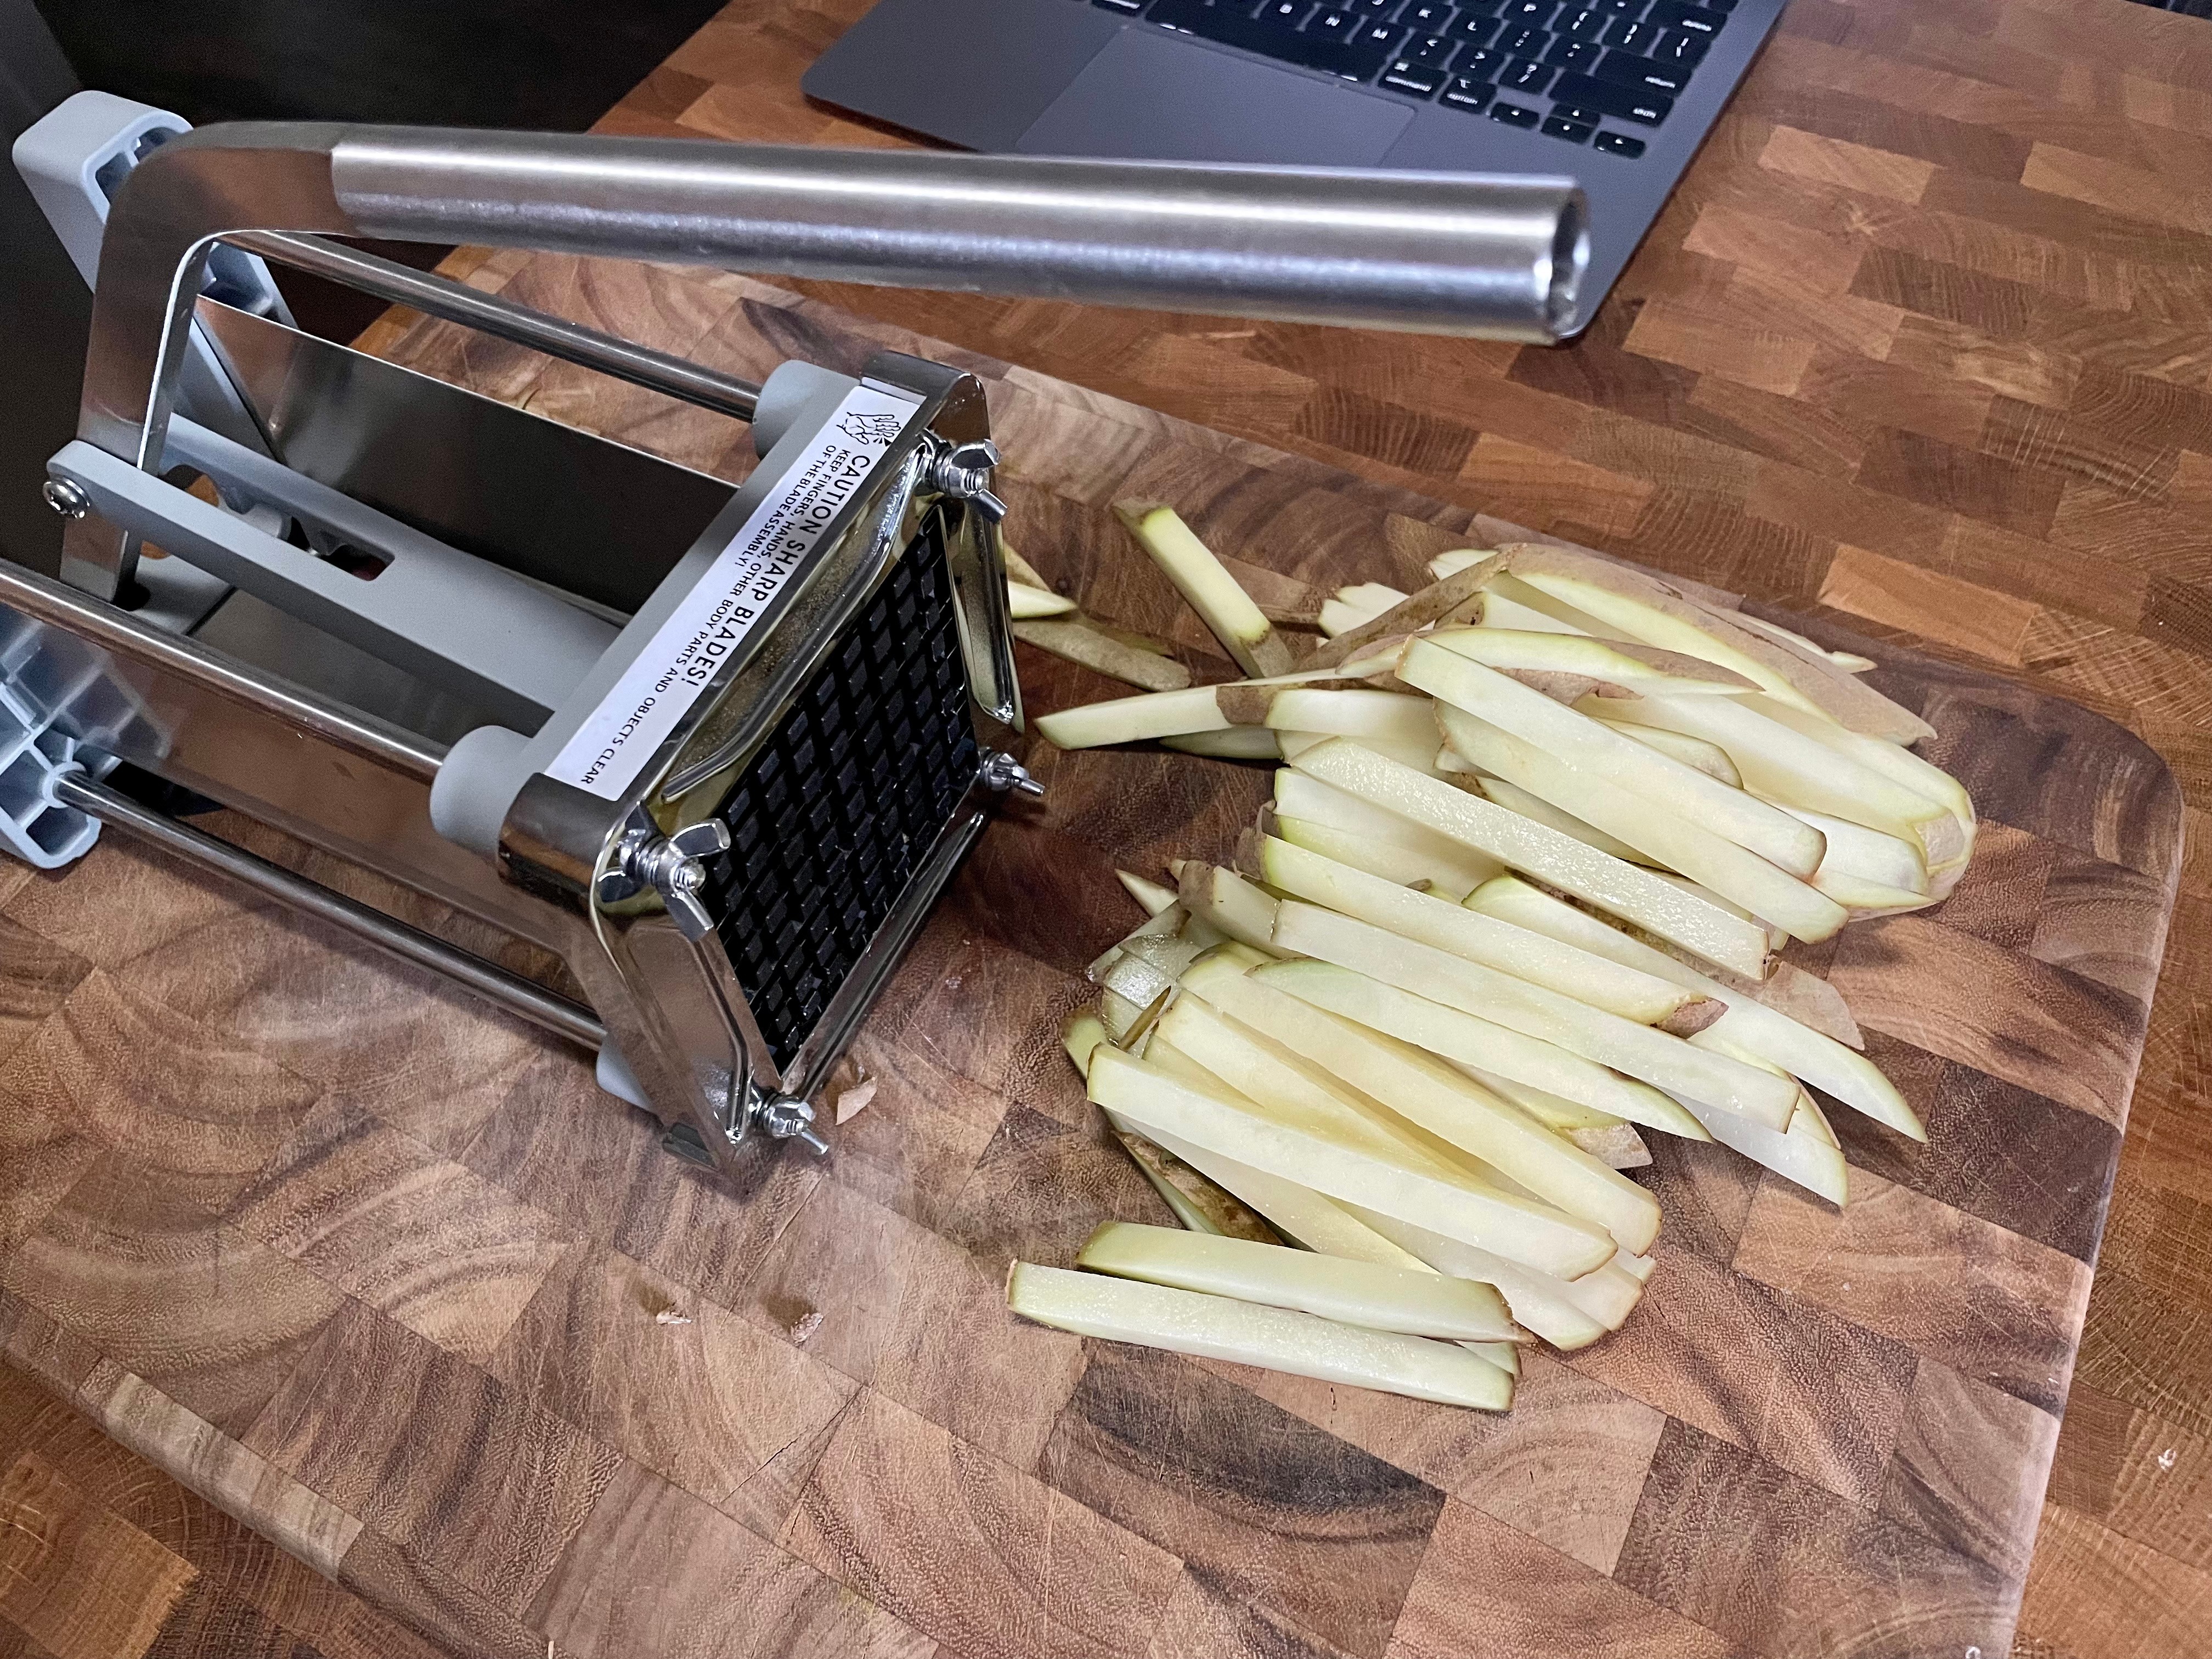 The Clean Store French Fry Cutter